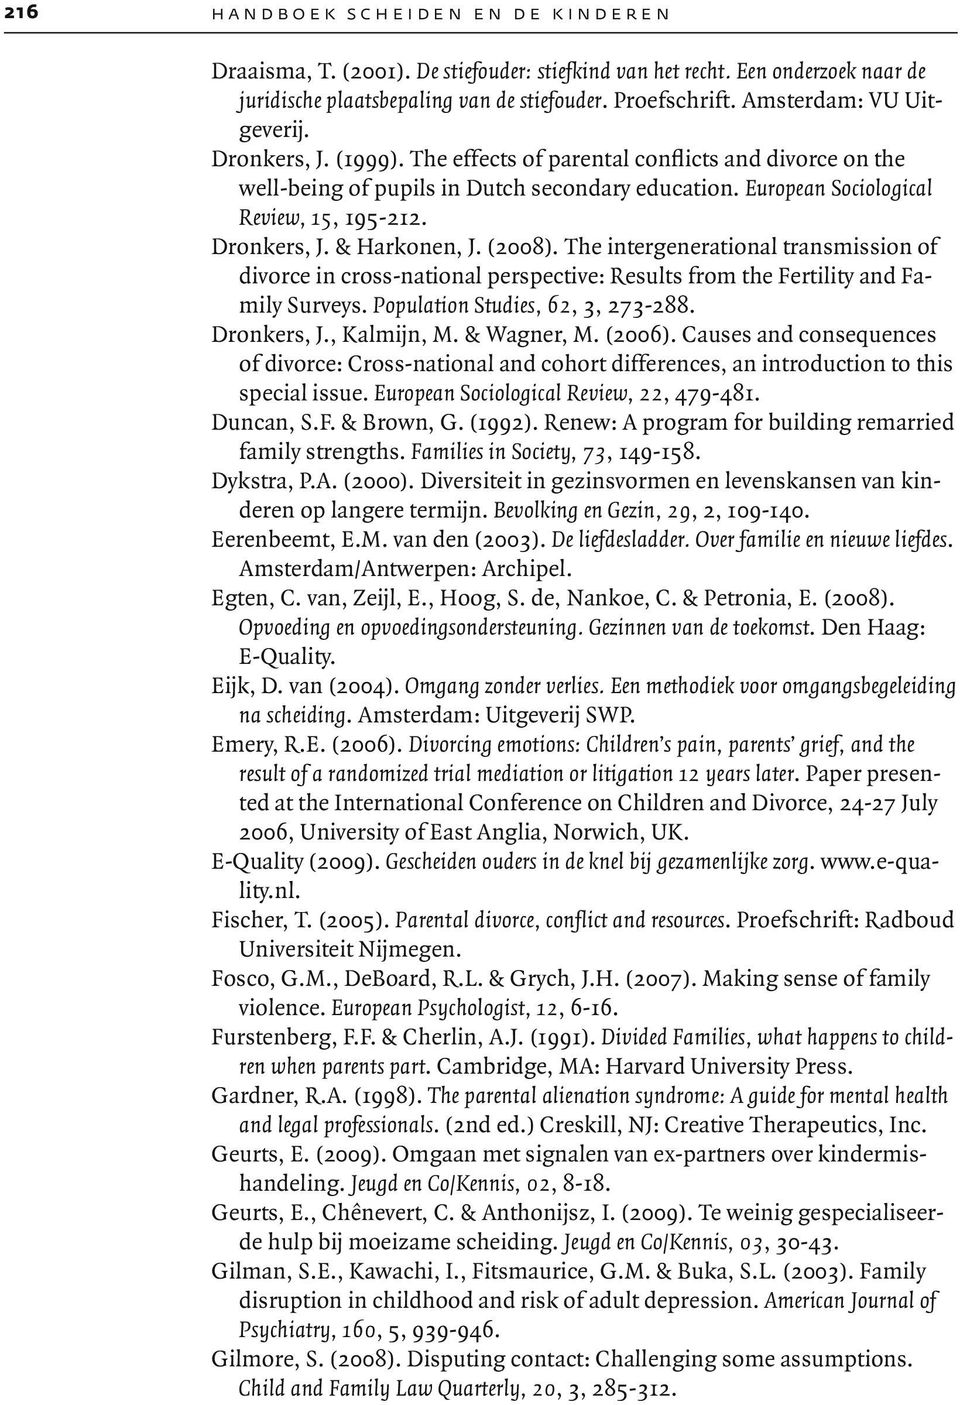 Dronkers, J. & Harkonen, J. (2008). The intergenerational transmission of divorce in cross-national perspective: Results from the Fertility and Family Surveys. Population Studies, 62, 3, 273-288.